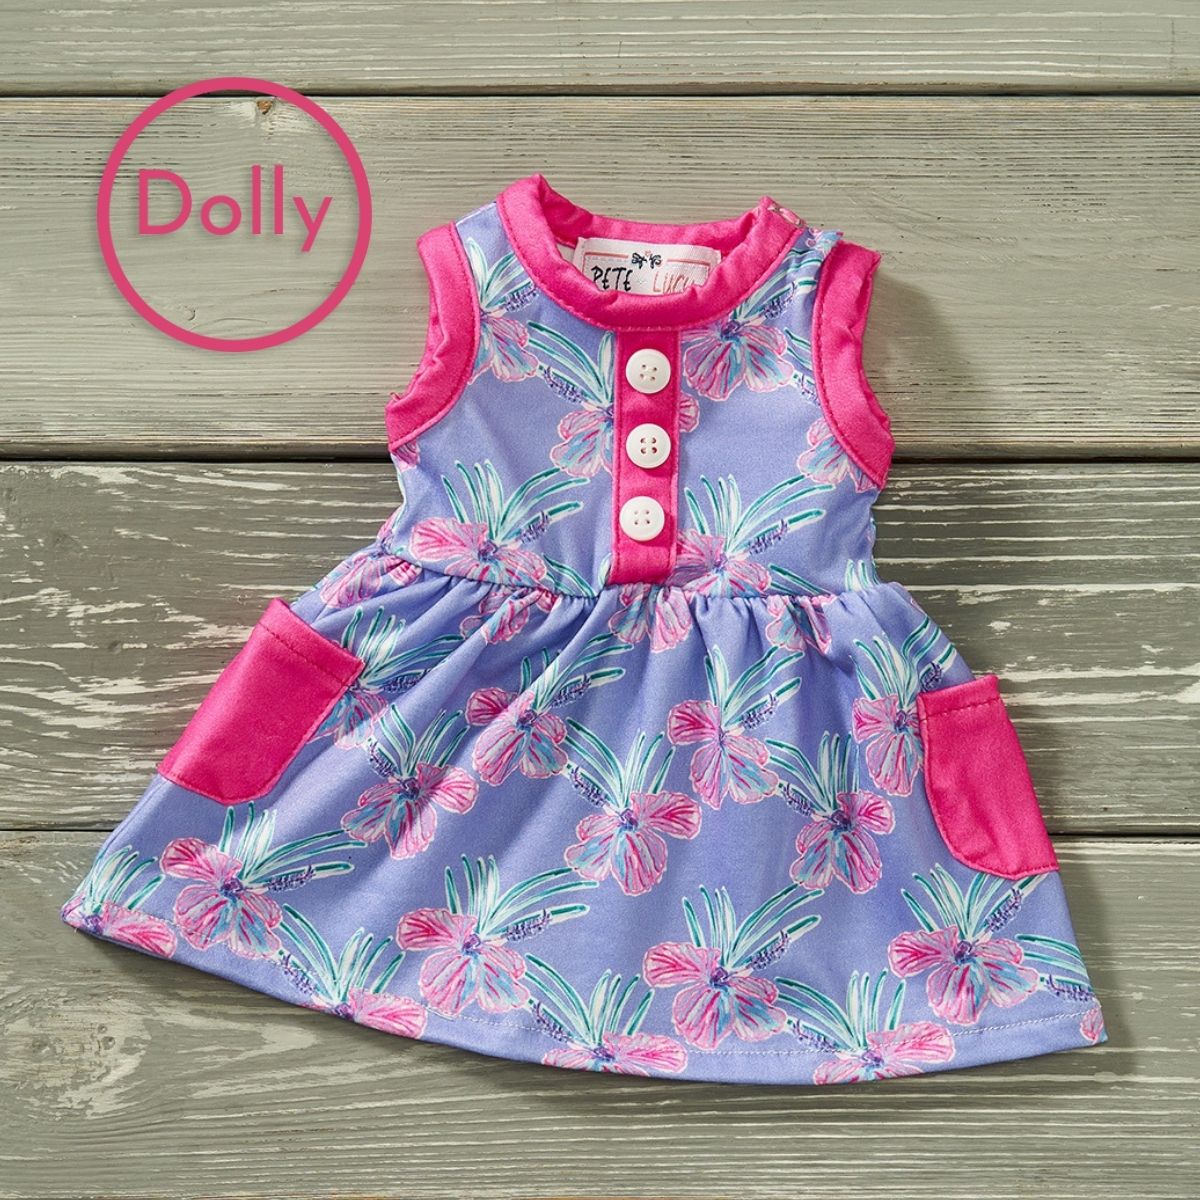 Pretty in Paradise - Dolly Dress